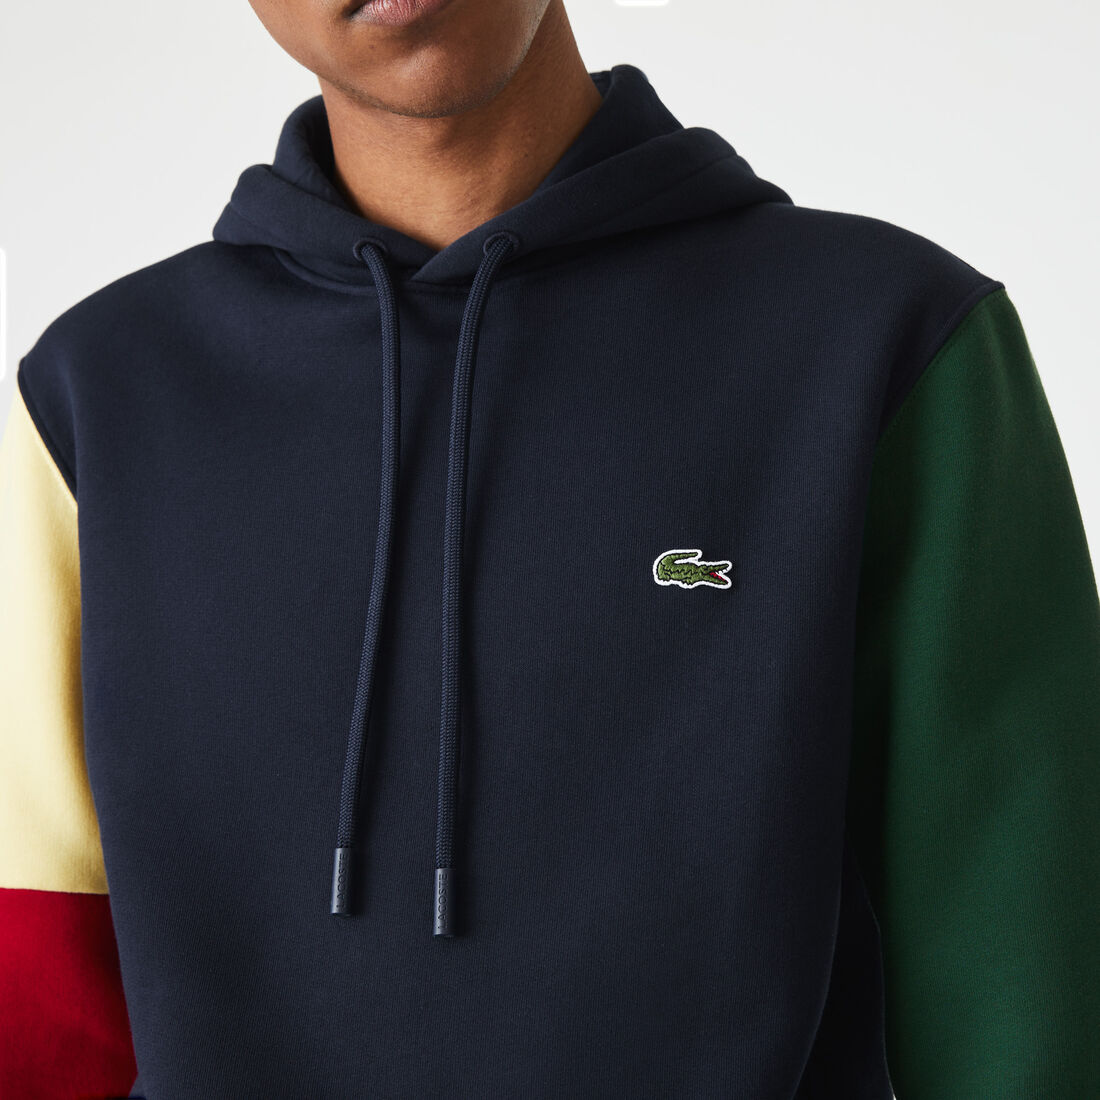 Lacoste - Colour-Block Hooded Sweatshirt - Navy/Green/Red/Yellow